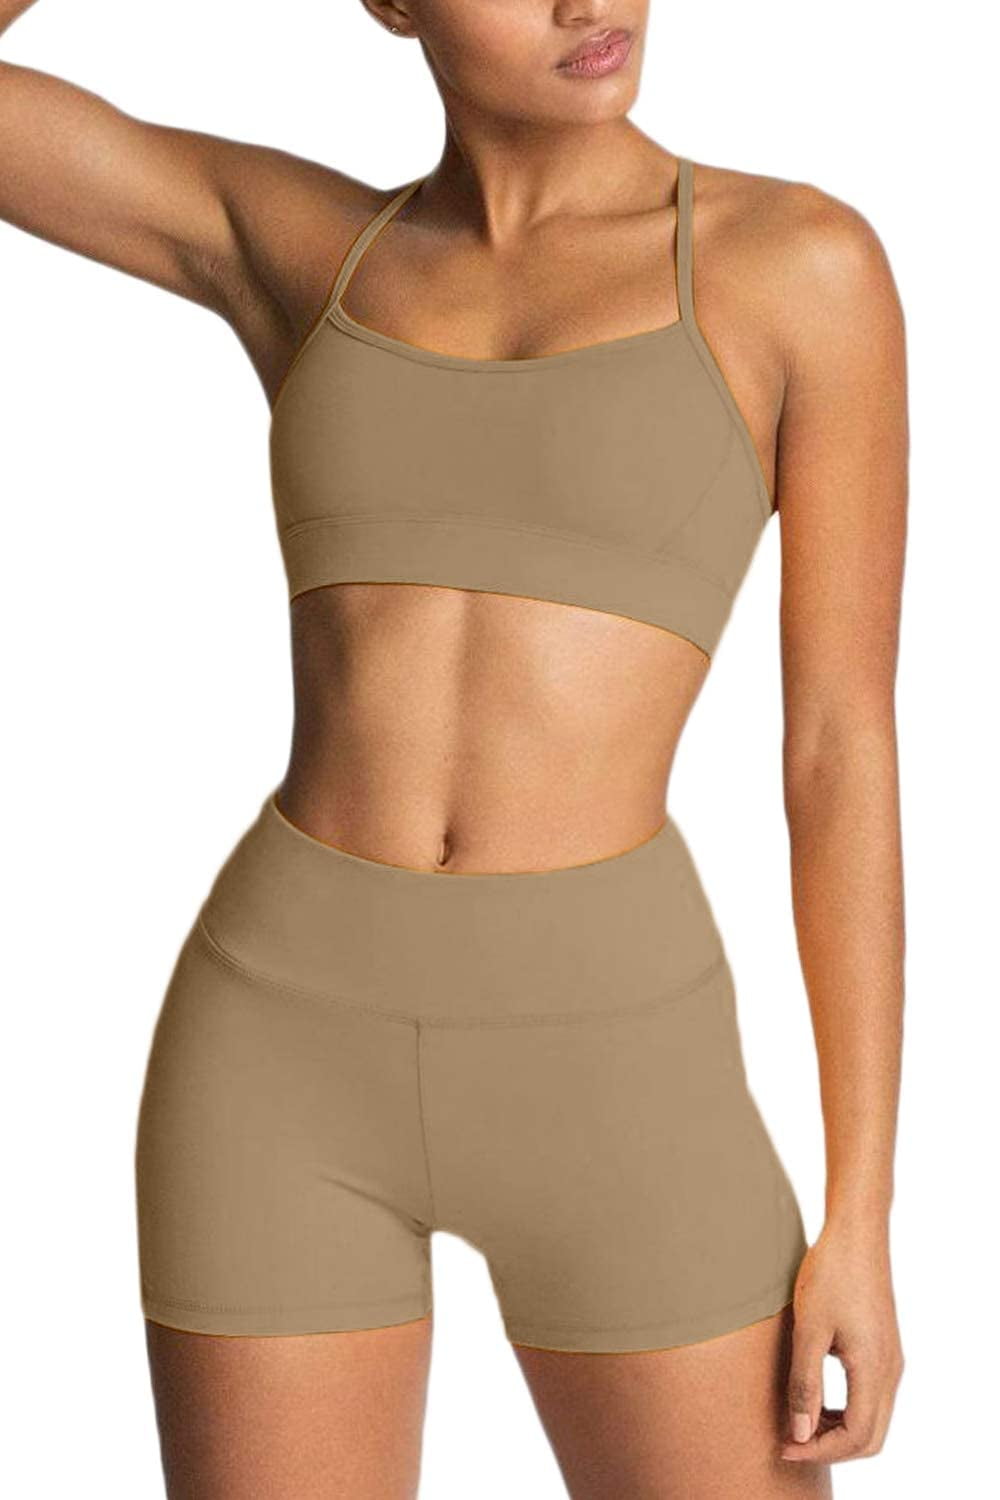 SheIn Women's Workout Sets for Women 2 Piece Seamless Bralette Bra and  Biker Shorts Yoga Gym Outfits Chocolate Brown Small, Chocolate Brown, Small  : : Clothing, Shoes & Accessories